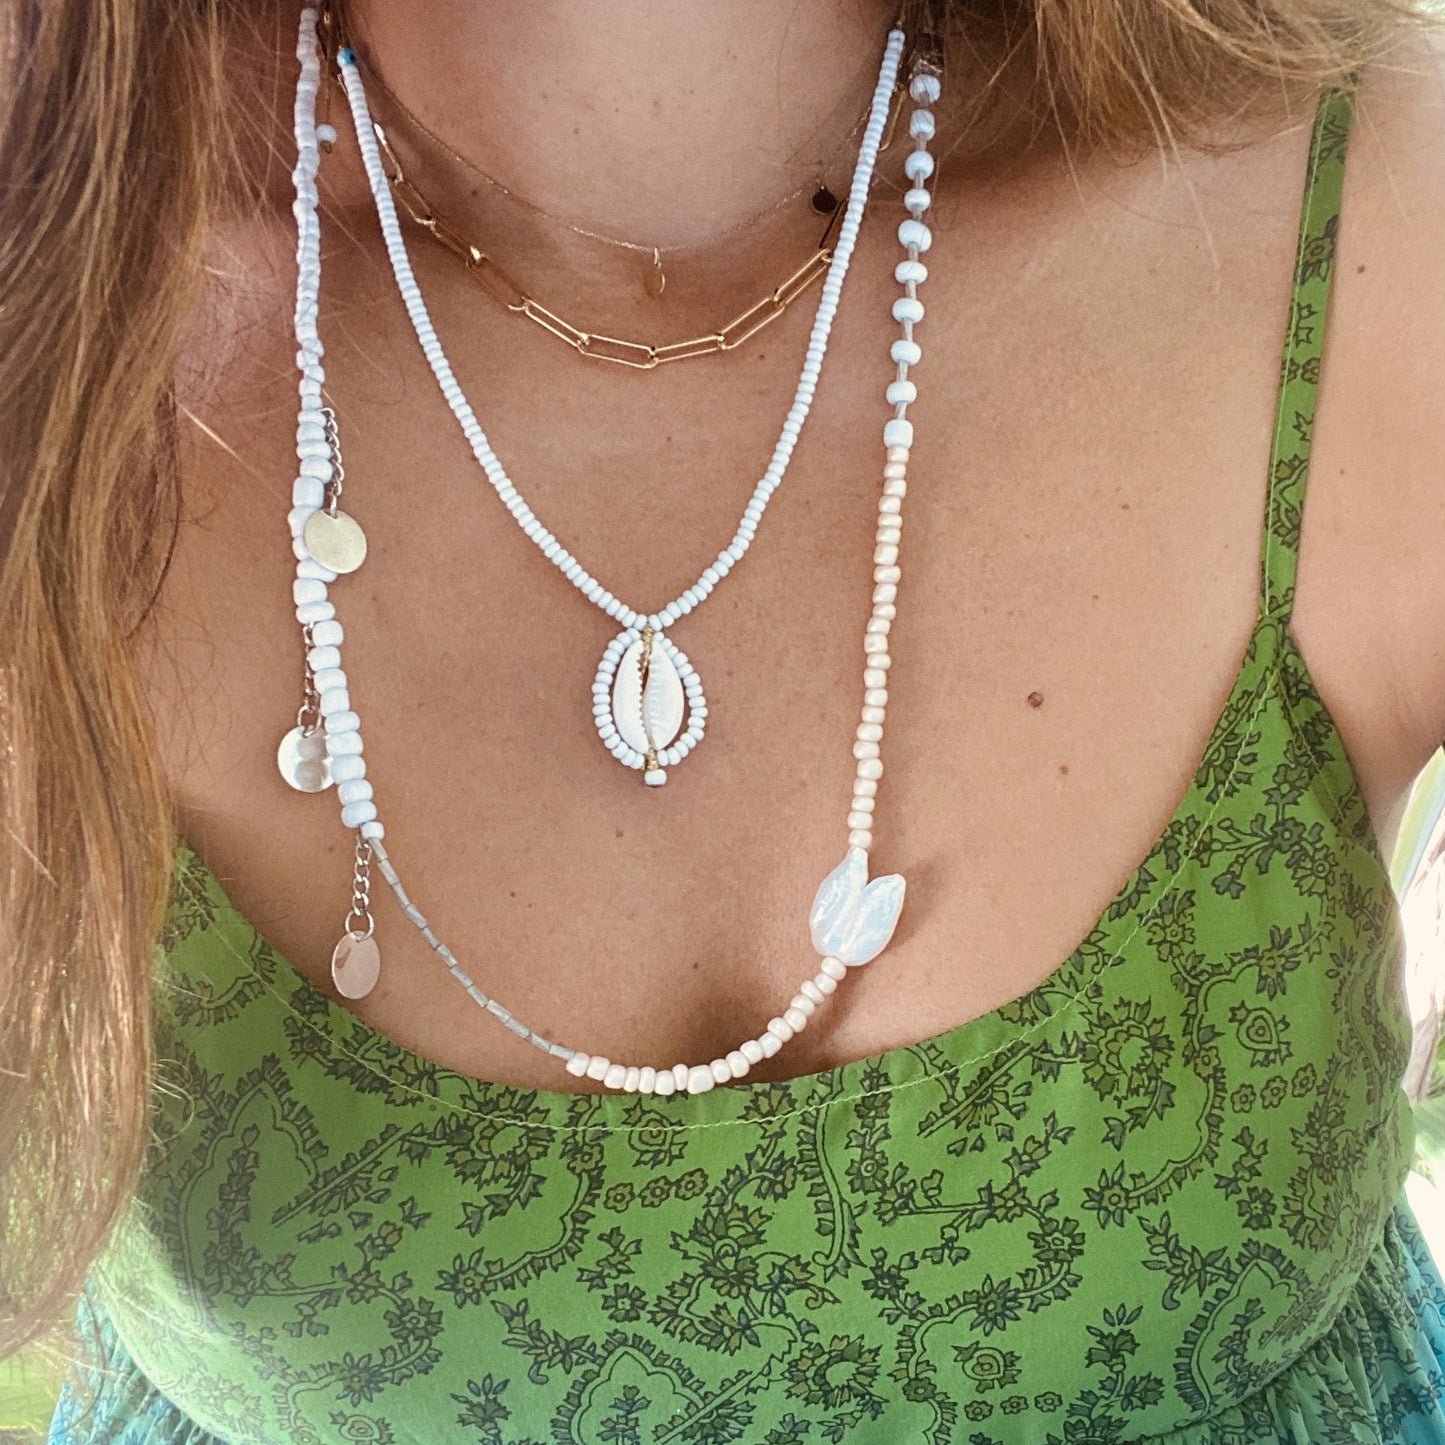 Beaded Shell Necklace in Three Colors